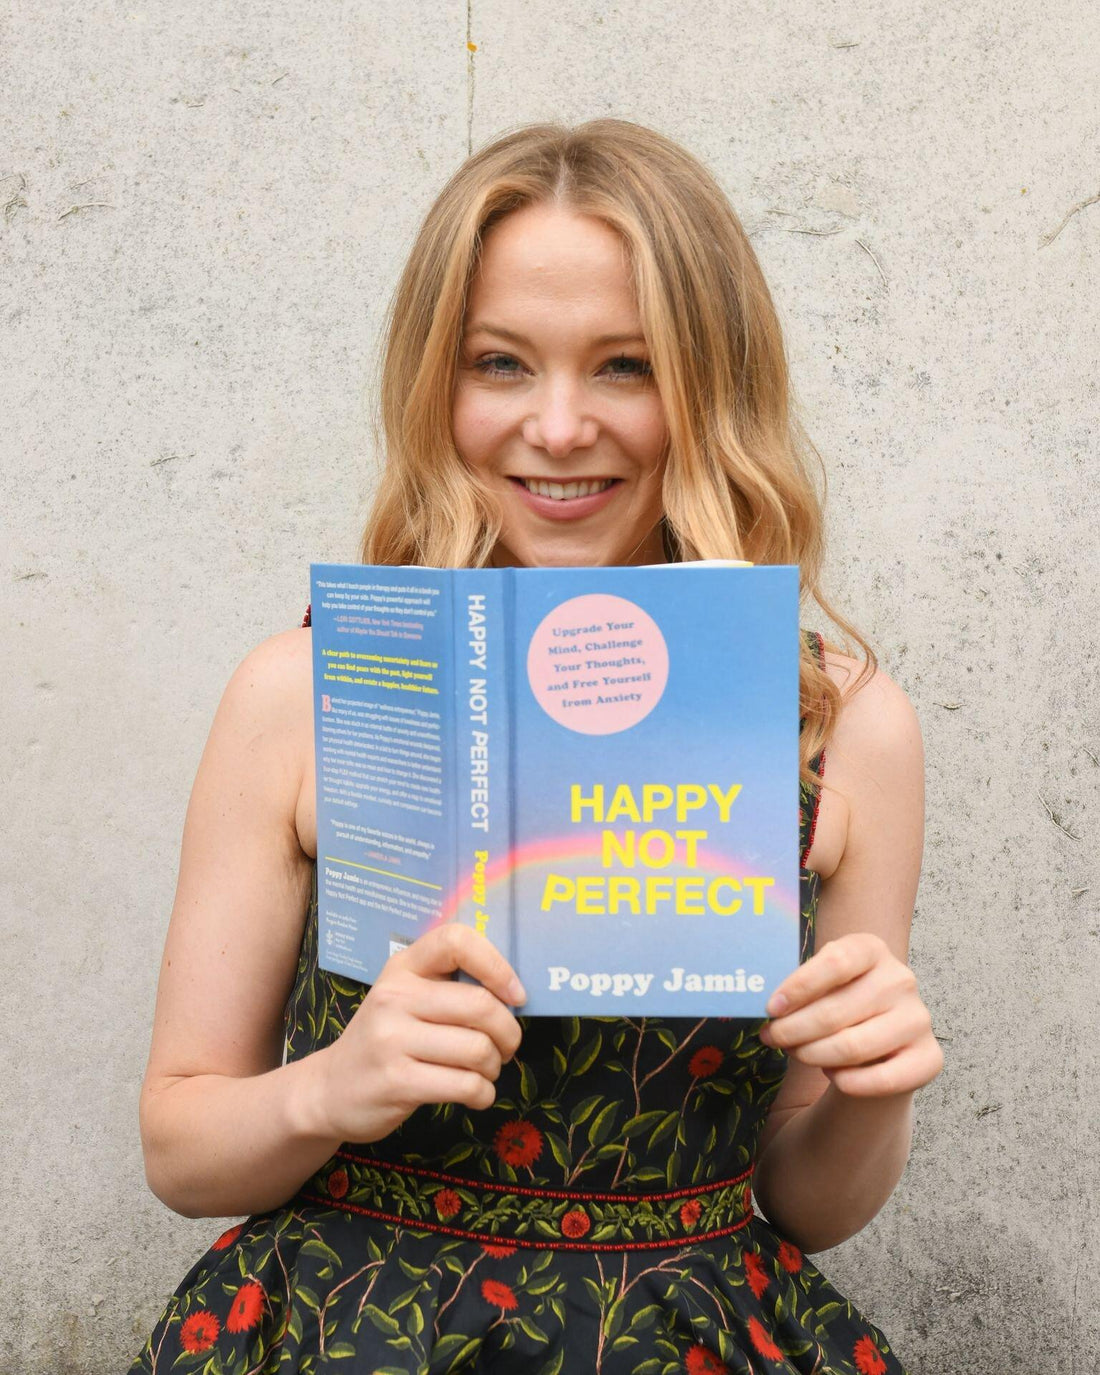 Learning How to Be Happy, Not Perfect with Poppy Jamie